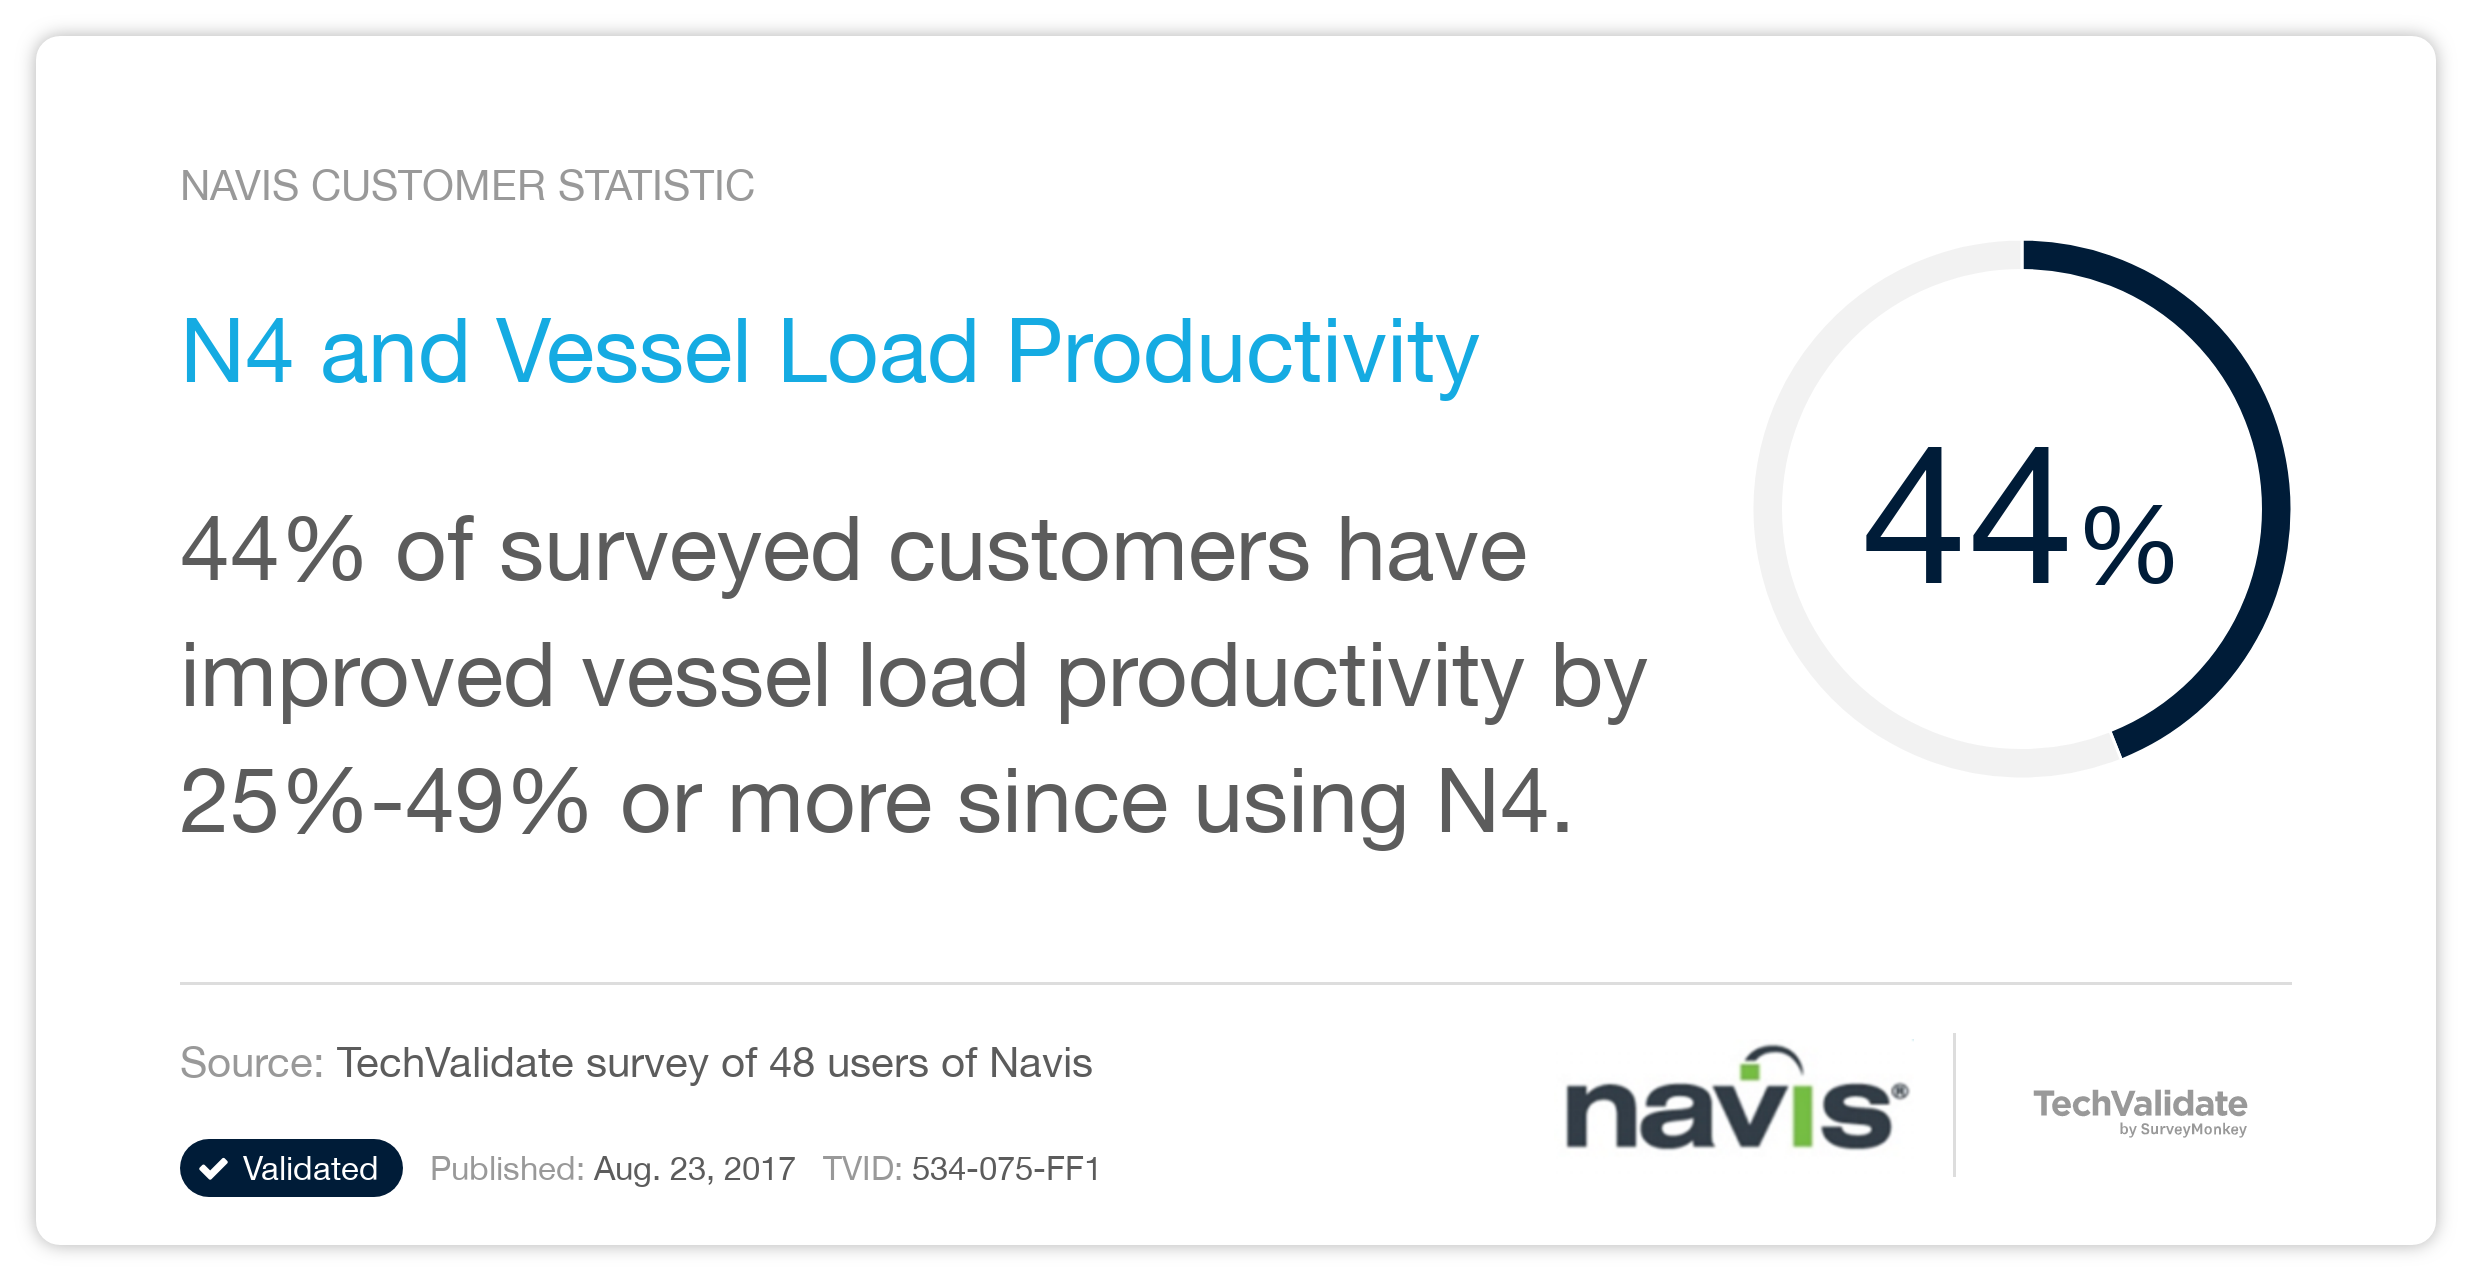 N4 and Vessel Load Productivity